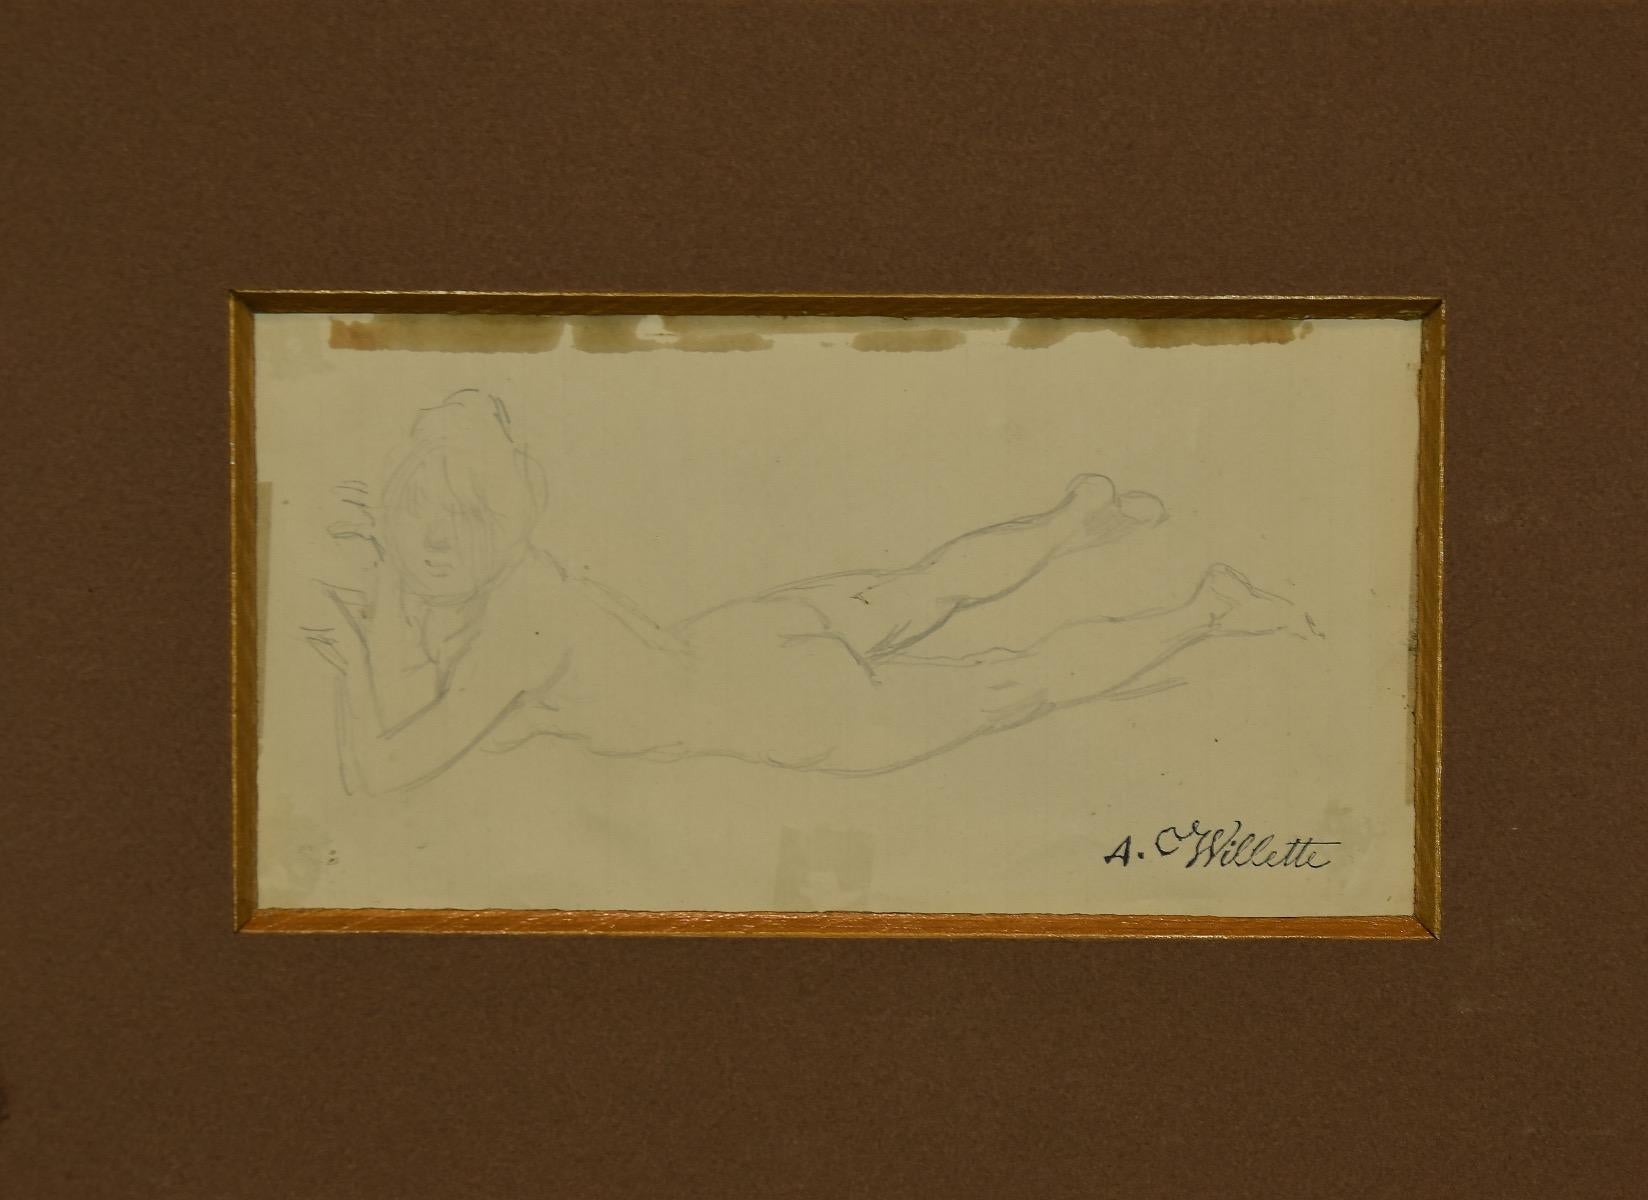 Nude of Woman is a splendid drawing in pencil realized by Adolphe Léon Willette, a French illustrator, painter, caricaturist, lithographer, and architect. The state of preservation is very good. 

On the lower right, in pen, there is the